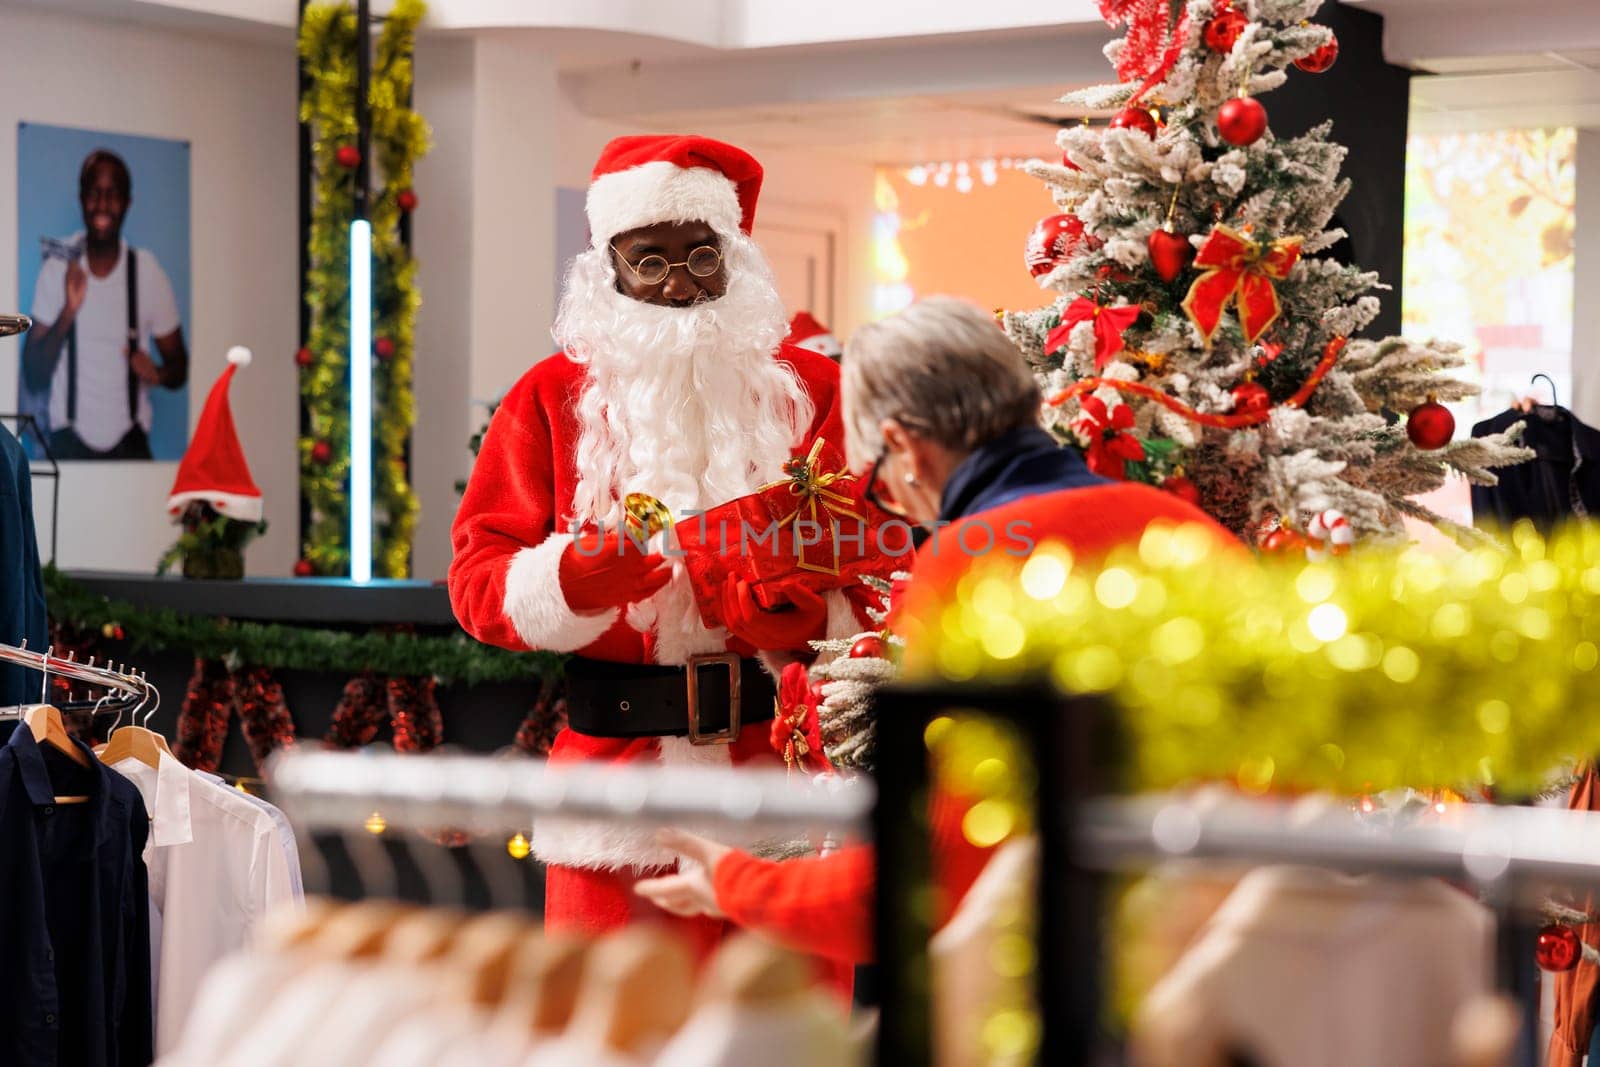 Santa Claus man in suit holding raffle at shopping center, inviting elderly person to participate at contest to win free clothing item during christmas holiday season. Festive decorated retail store.